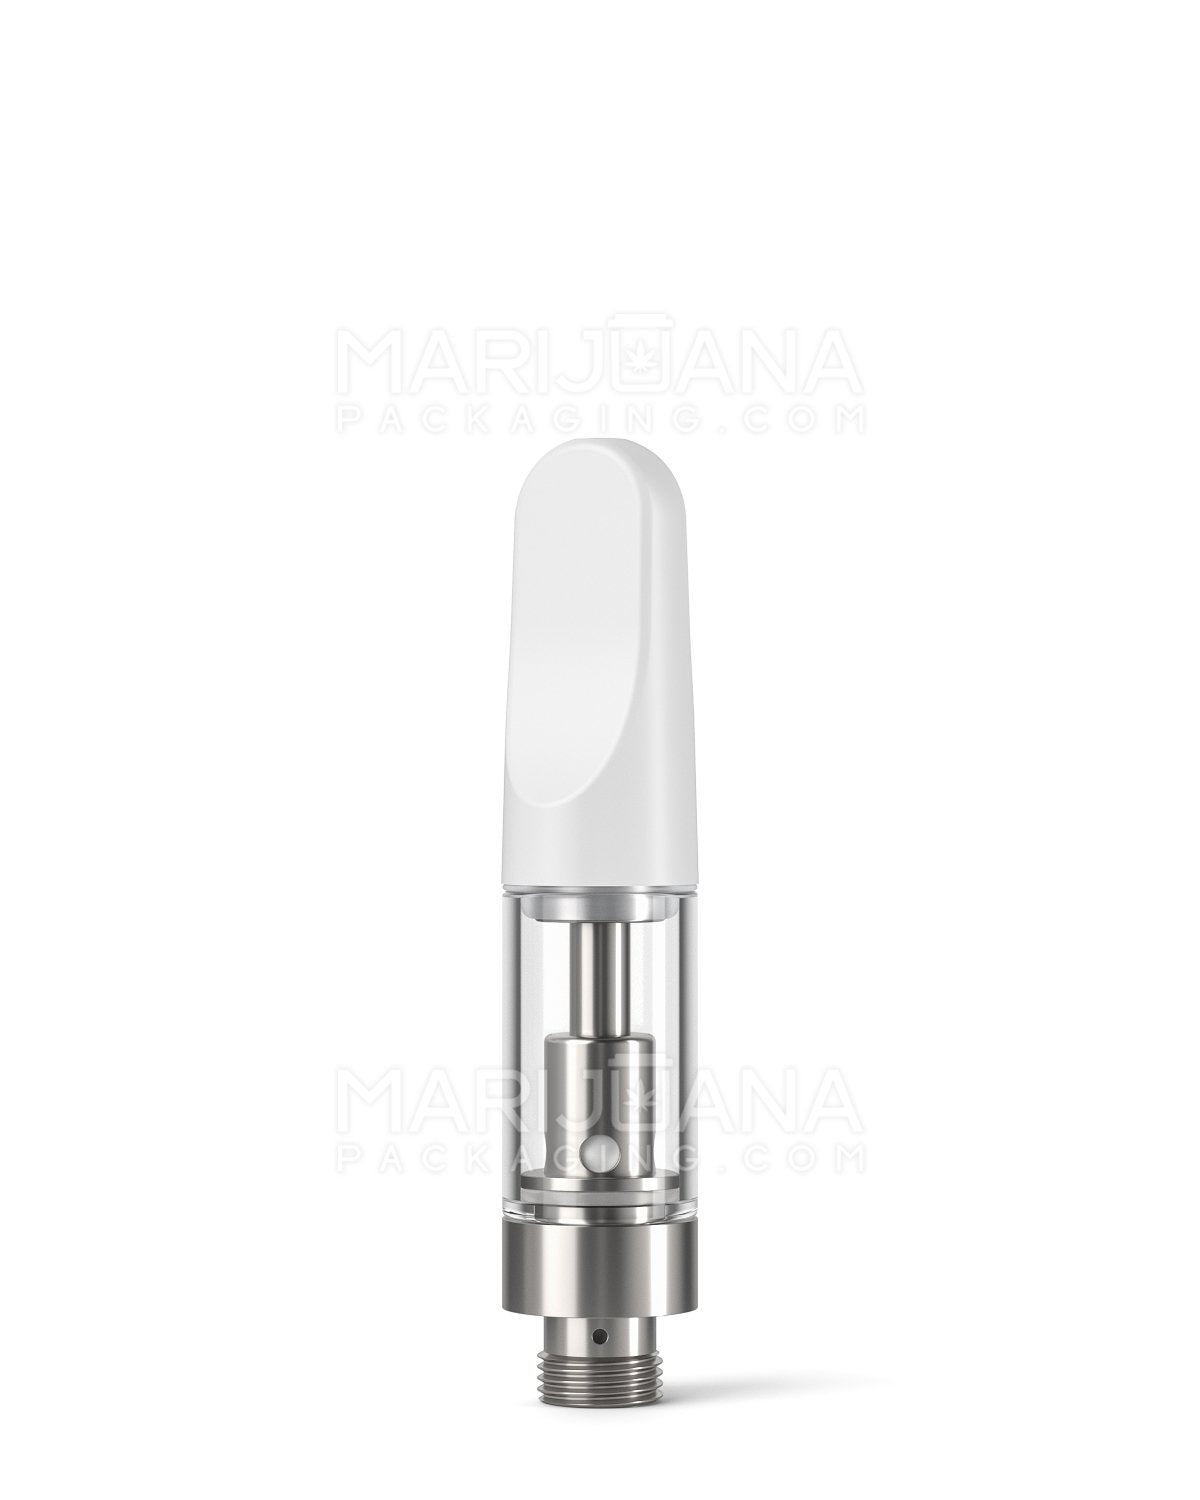 CCELL | Liquid6 Reactor Glass Cartridge with White Plastic Mouthpiece | 0.5mL - Screw On | Sample - 1